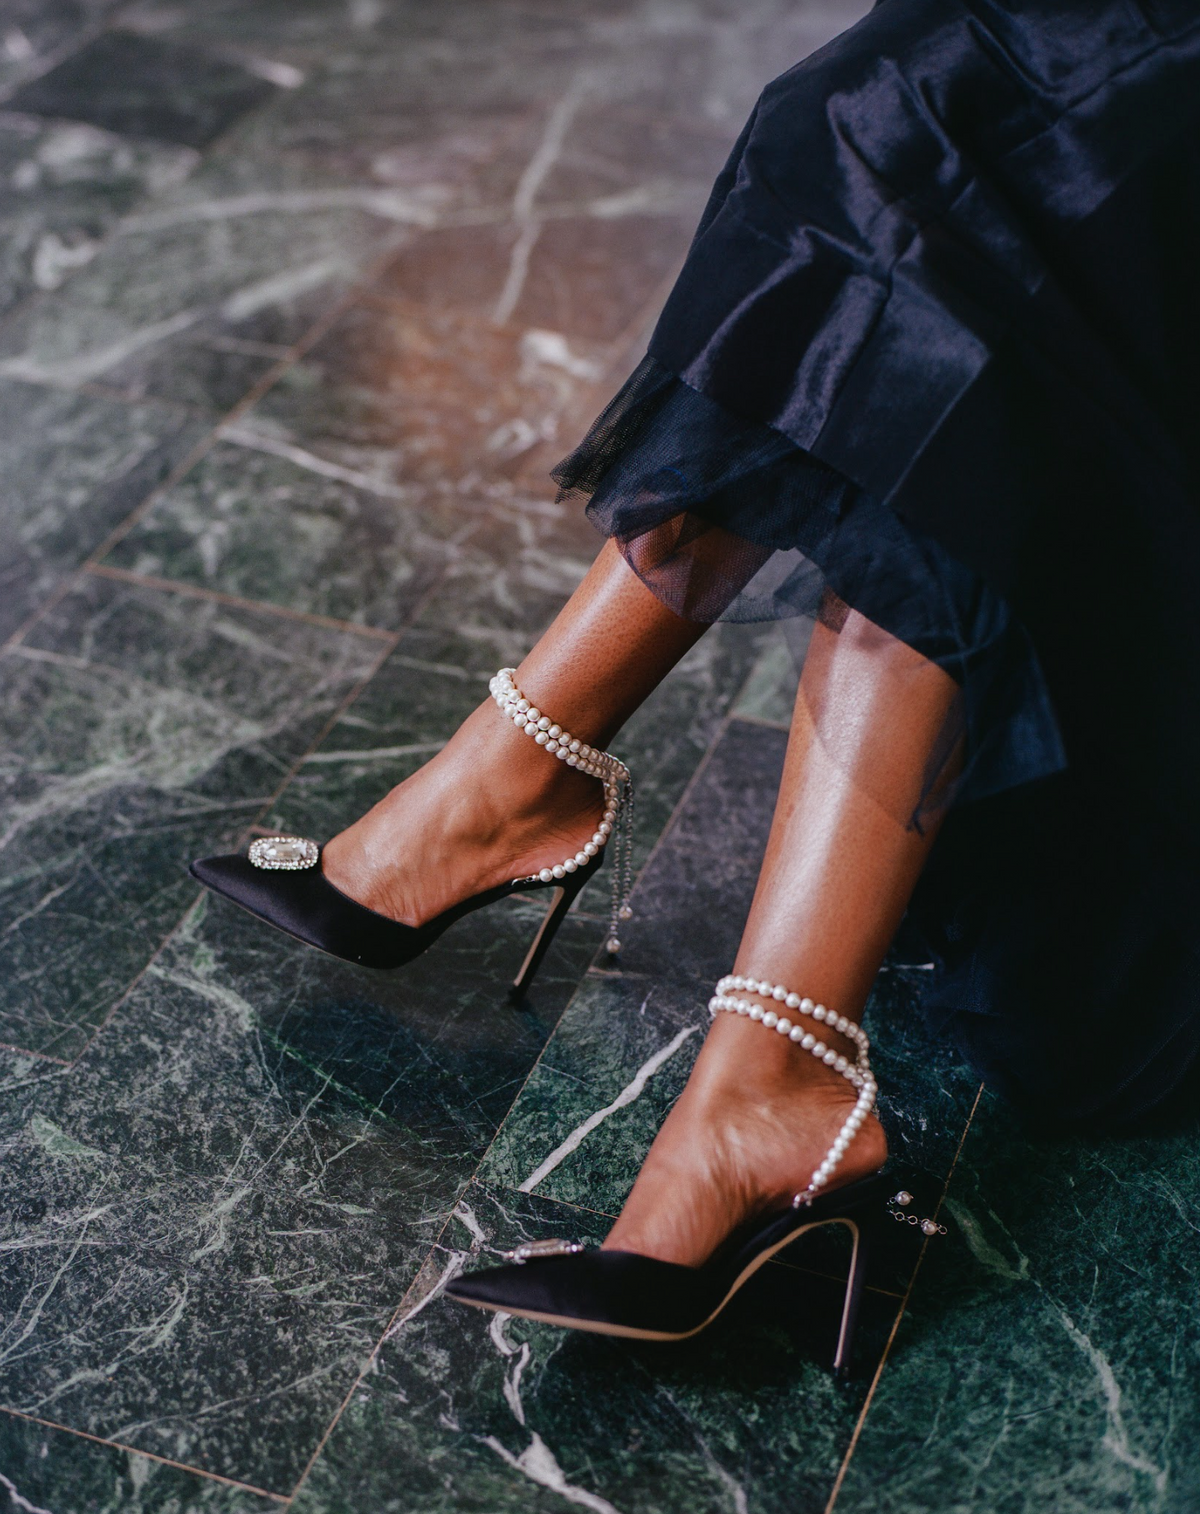 Zena Ziora luxury footwear capsule collection: The Dame pearl stiletto heel with crystal rectangular diamond embellishment in black satin. Model wearing shoes with legs crossed. Black formal ballgown in view.